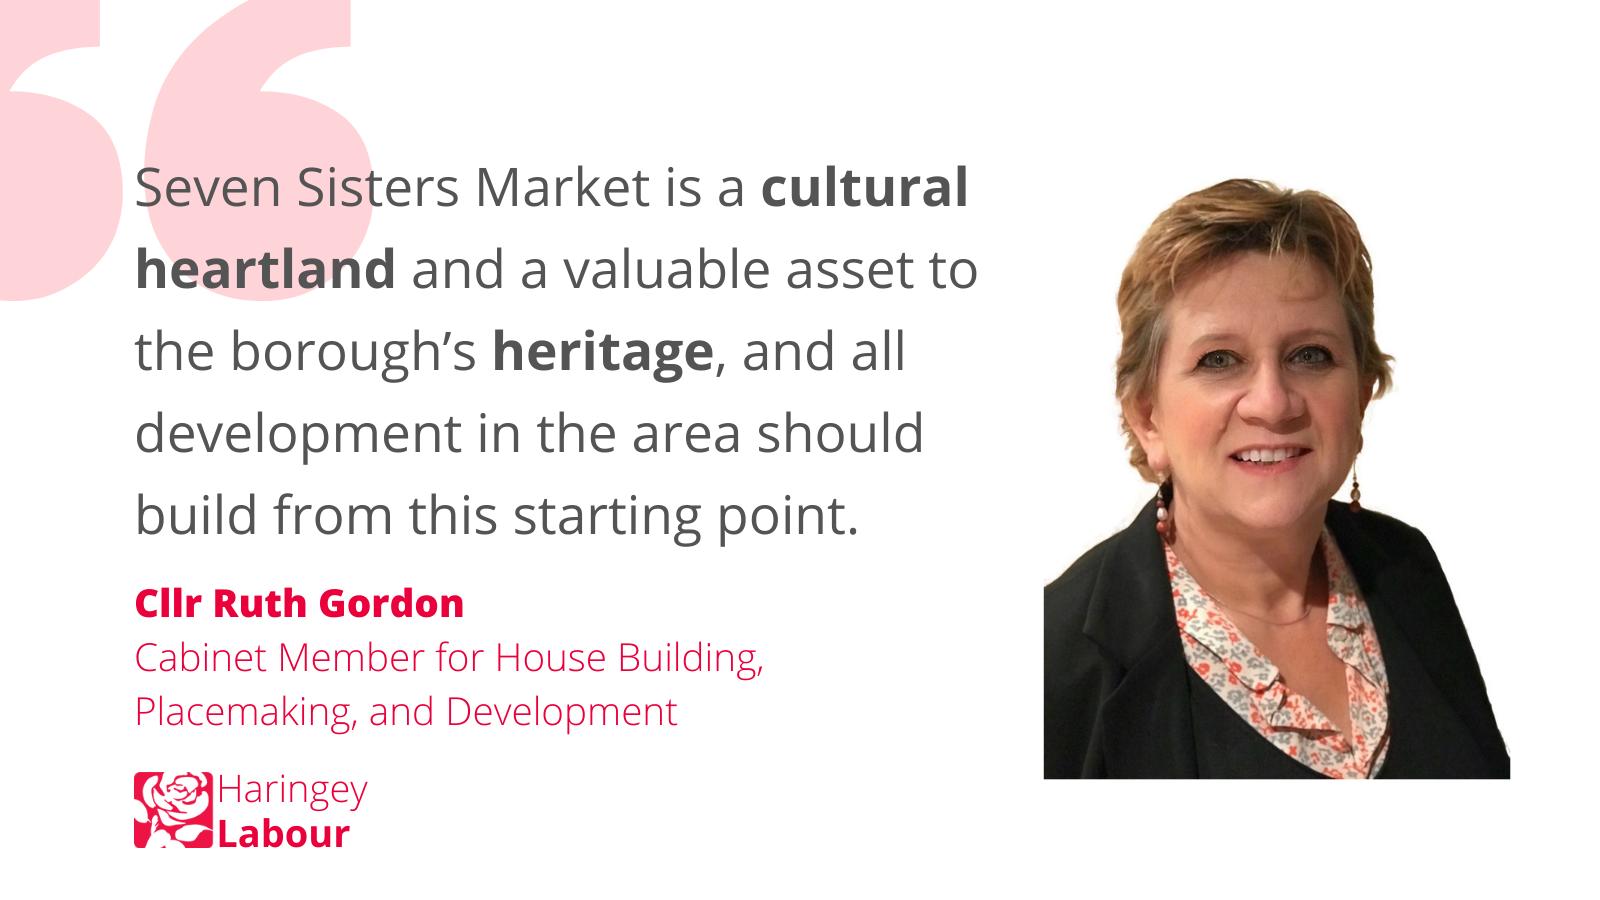 Latin Market is a valuable asset to the borough’s cultural heritage